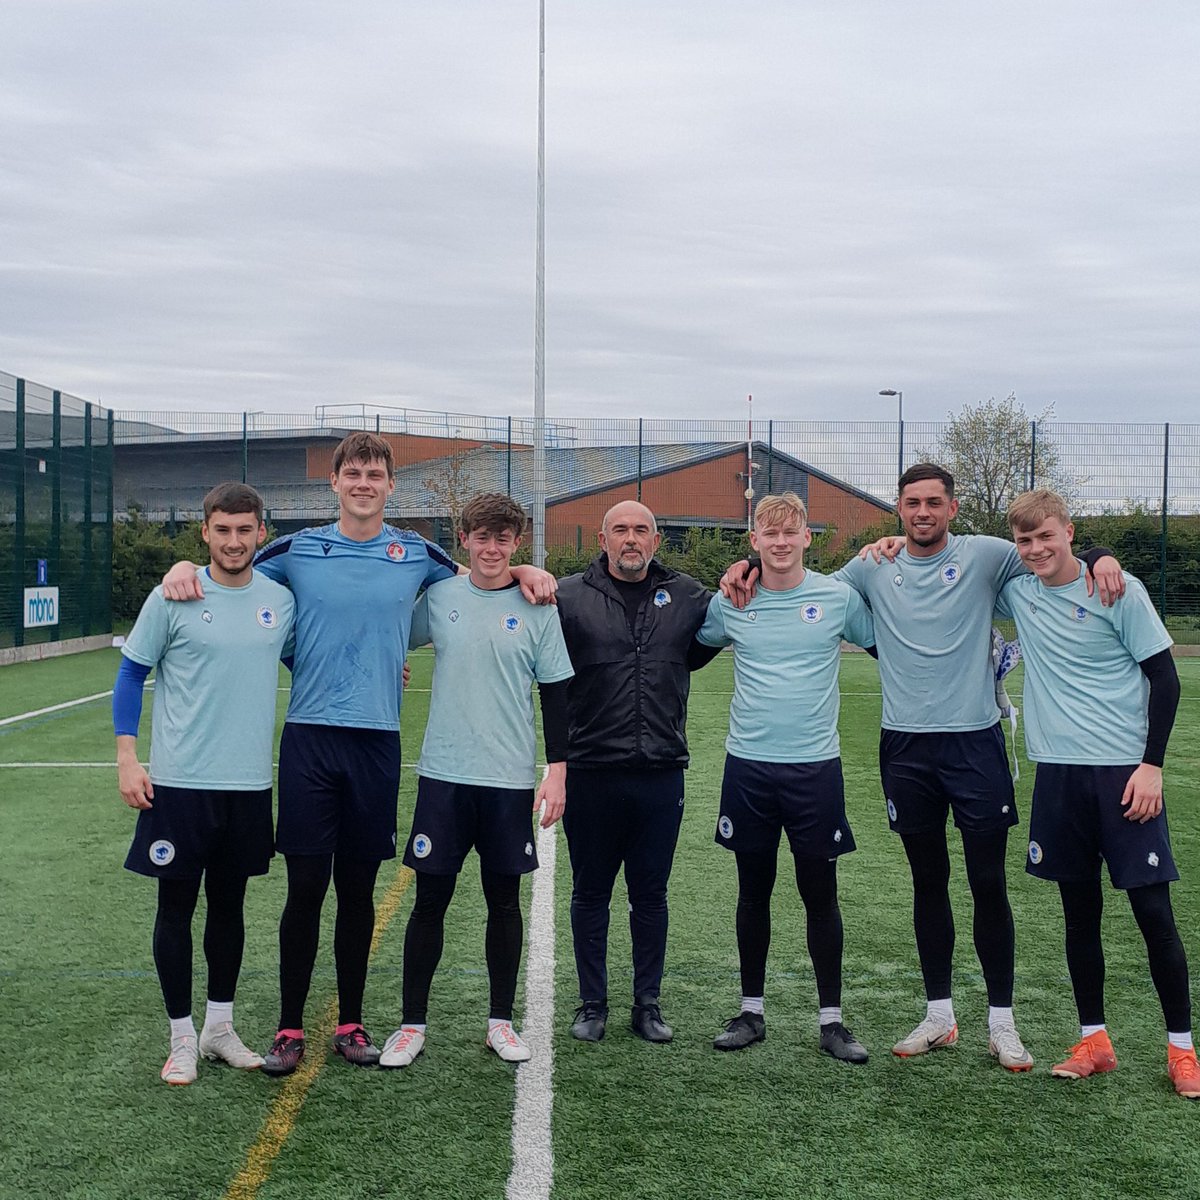 It's been an absolute pleasure to work with these lads on a regular basis. 
Helping them develop as GK's 🧤 & more importantly as men.
Big shout out to other @ChesterFC GK's & training keepers missing from pic who have hugely contributed to the #GKUnion this season. 👏👏🦭⚽️